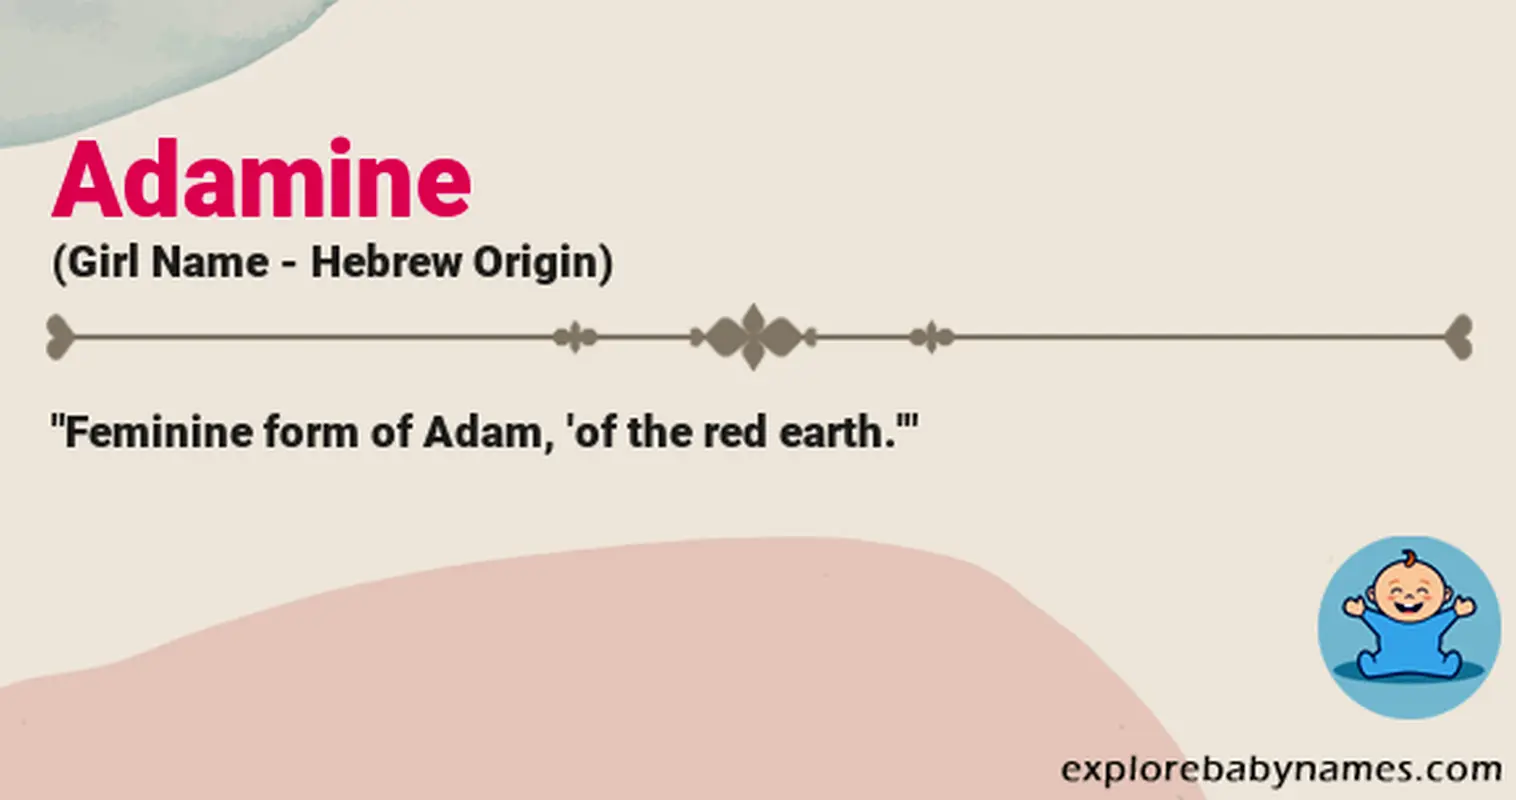 Meaning of Adamine